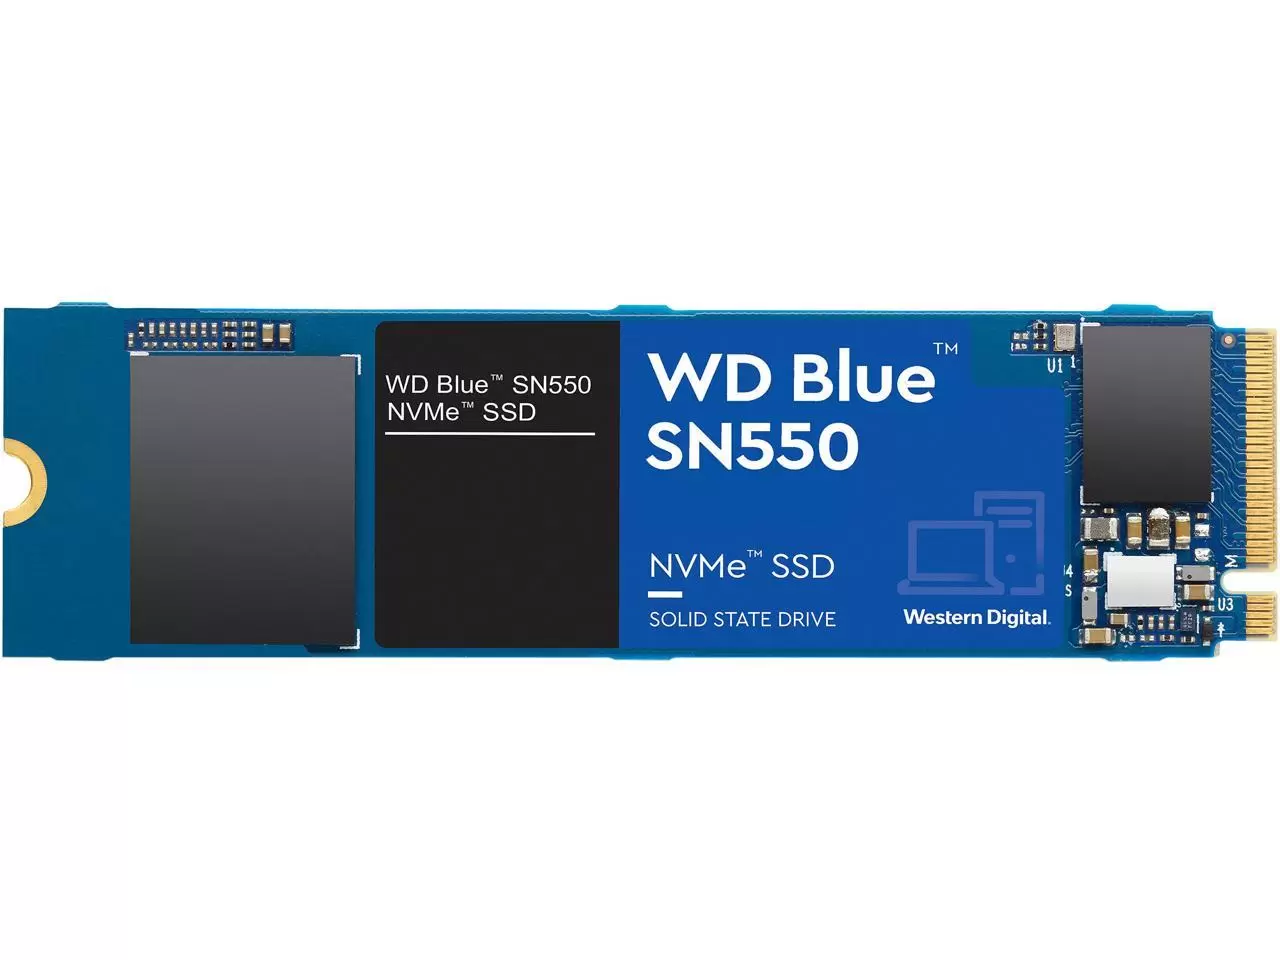 SMART and SSDs